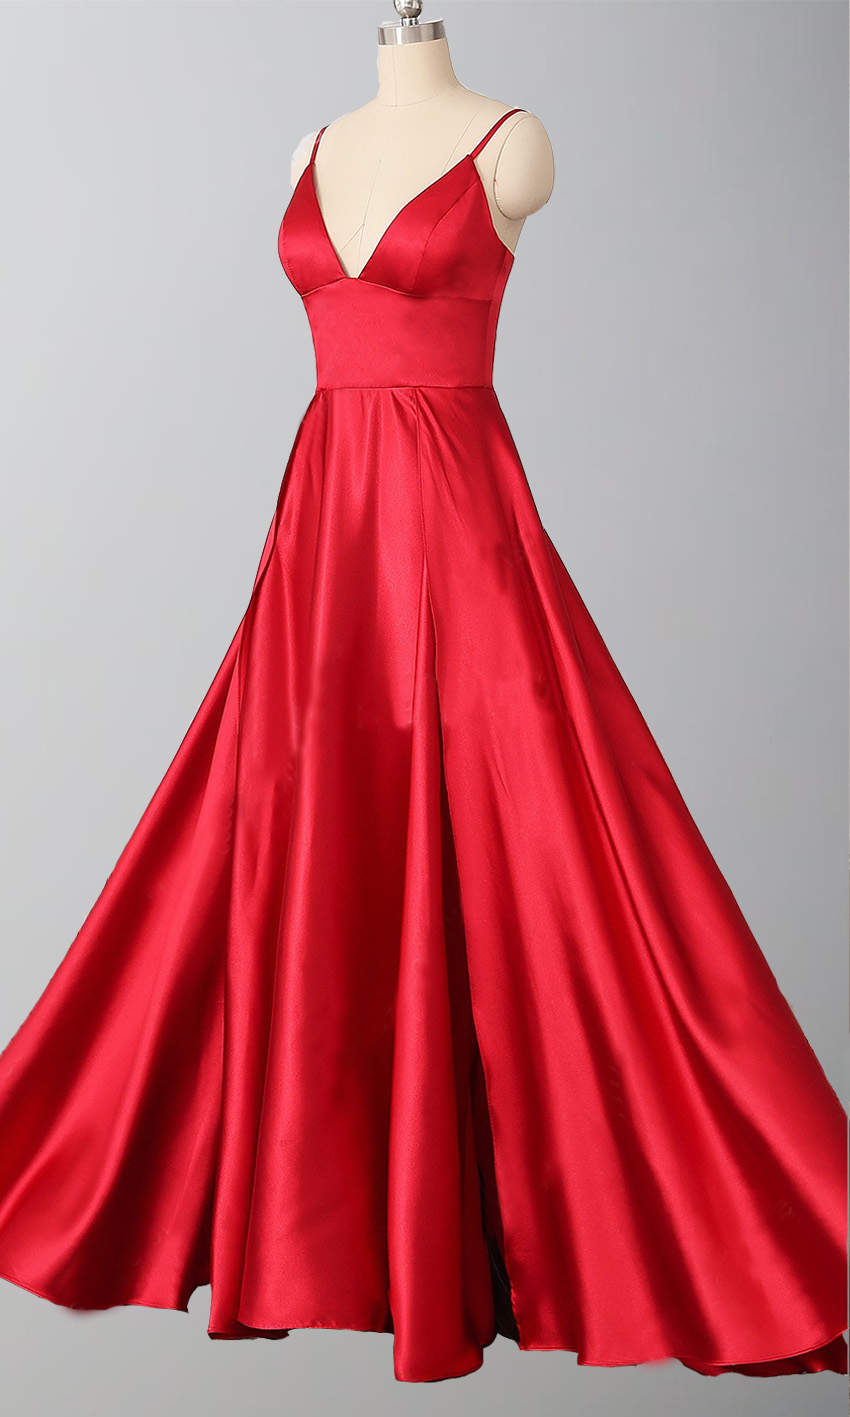 Red Prom Dress 2020, Prom Dresses, Pageant Dress, Evening Dress, Ball Dance Dresses, Graduation School Party Gown